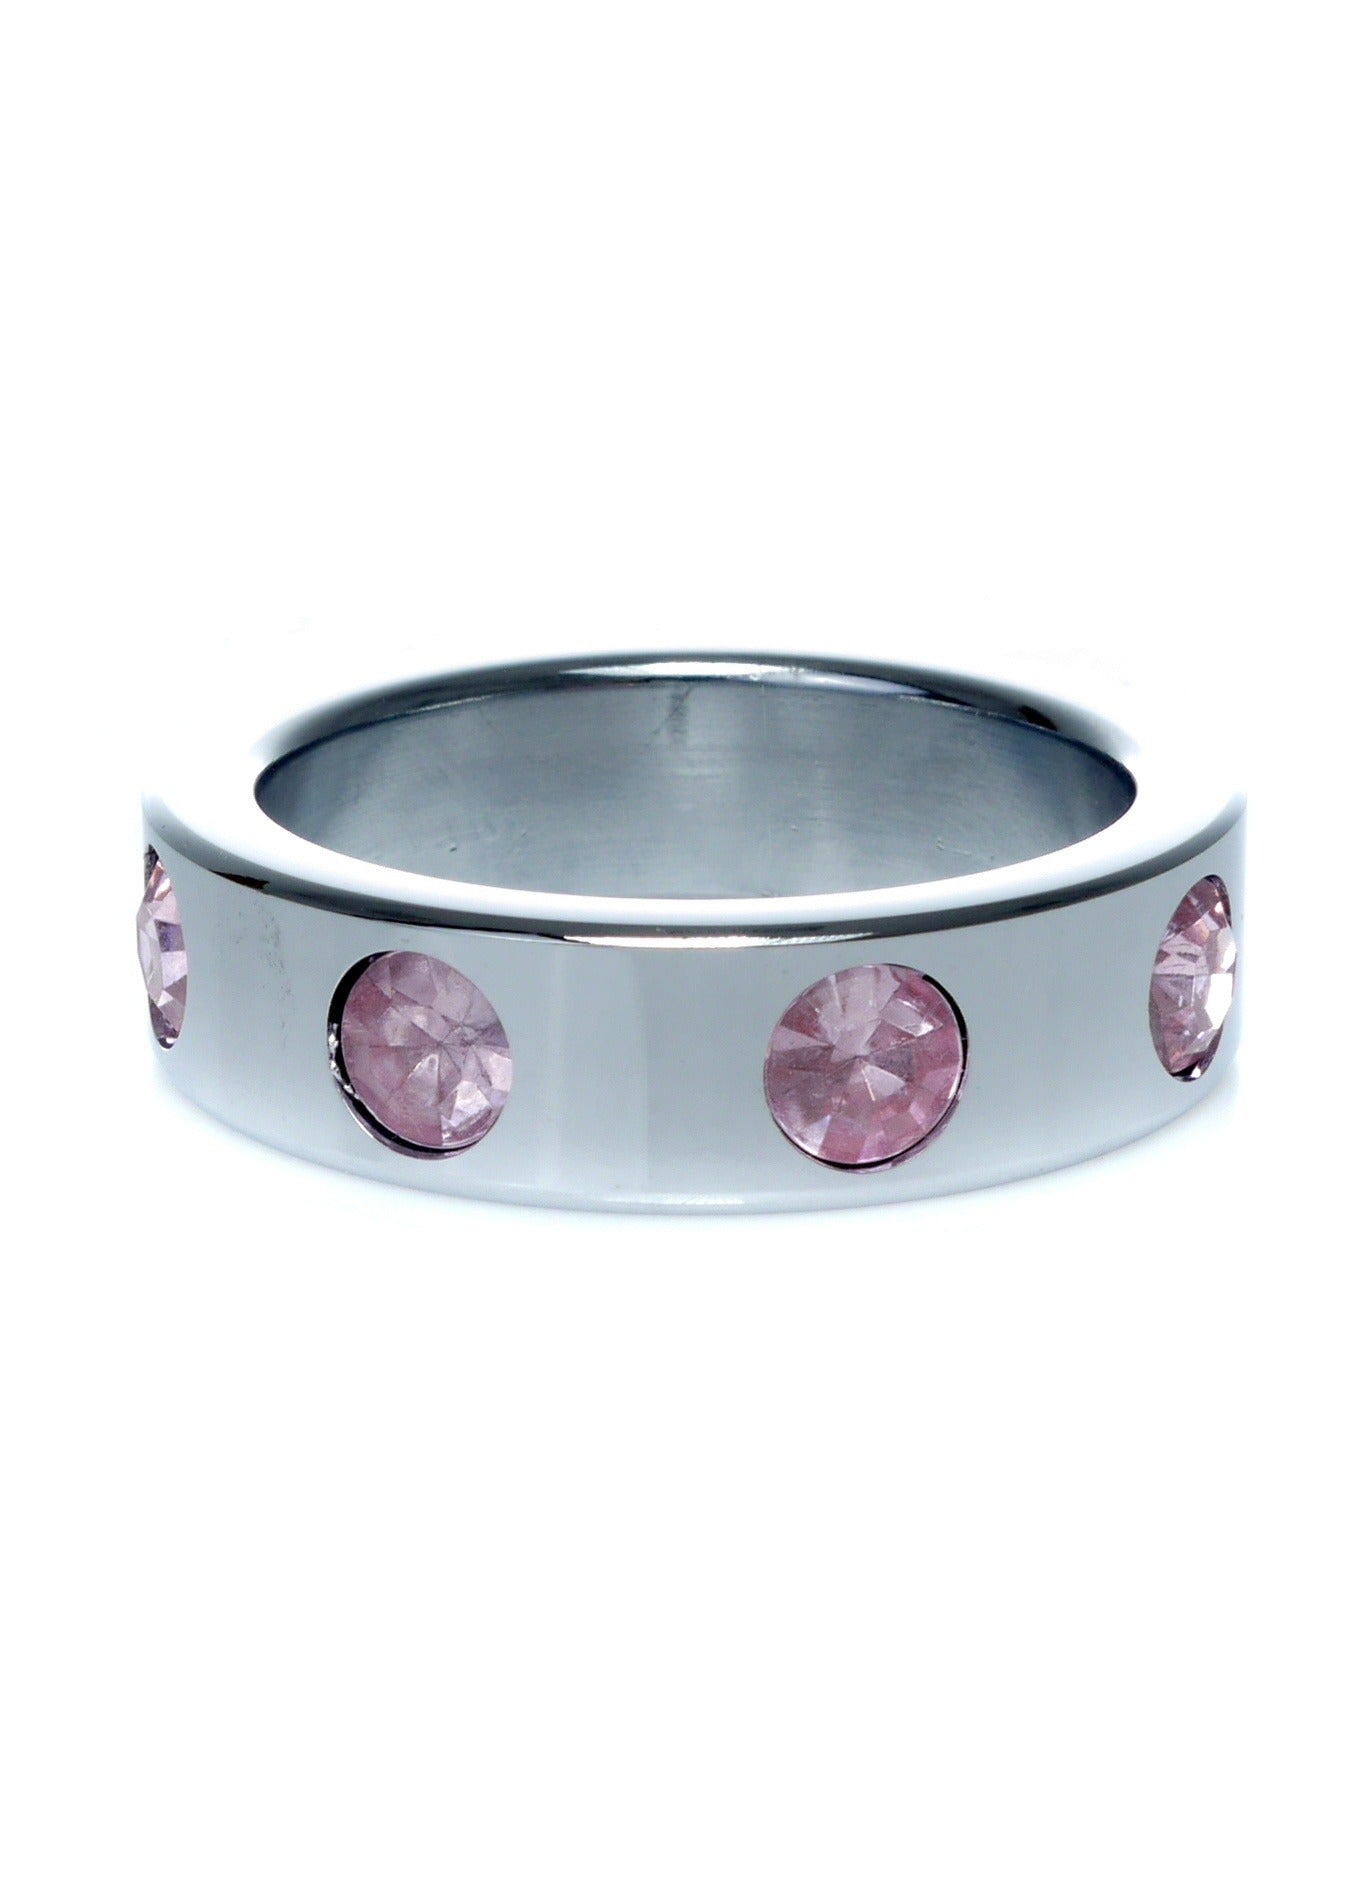 Bossoftoys - 64-00122 - Stainless steel - Metal Cockring - with rose Diamond stones - Large size - inner dia 4,5 CM - outer dia 5,5 CM